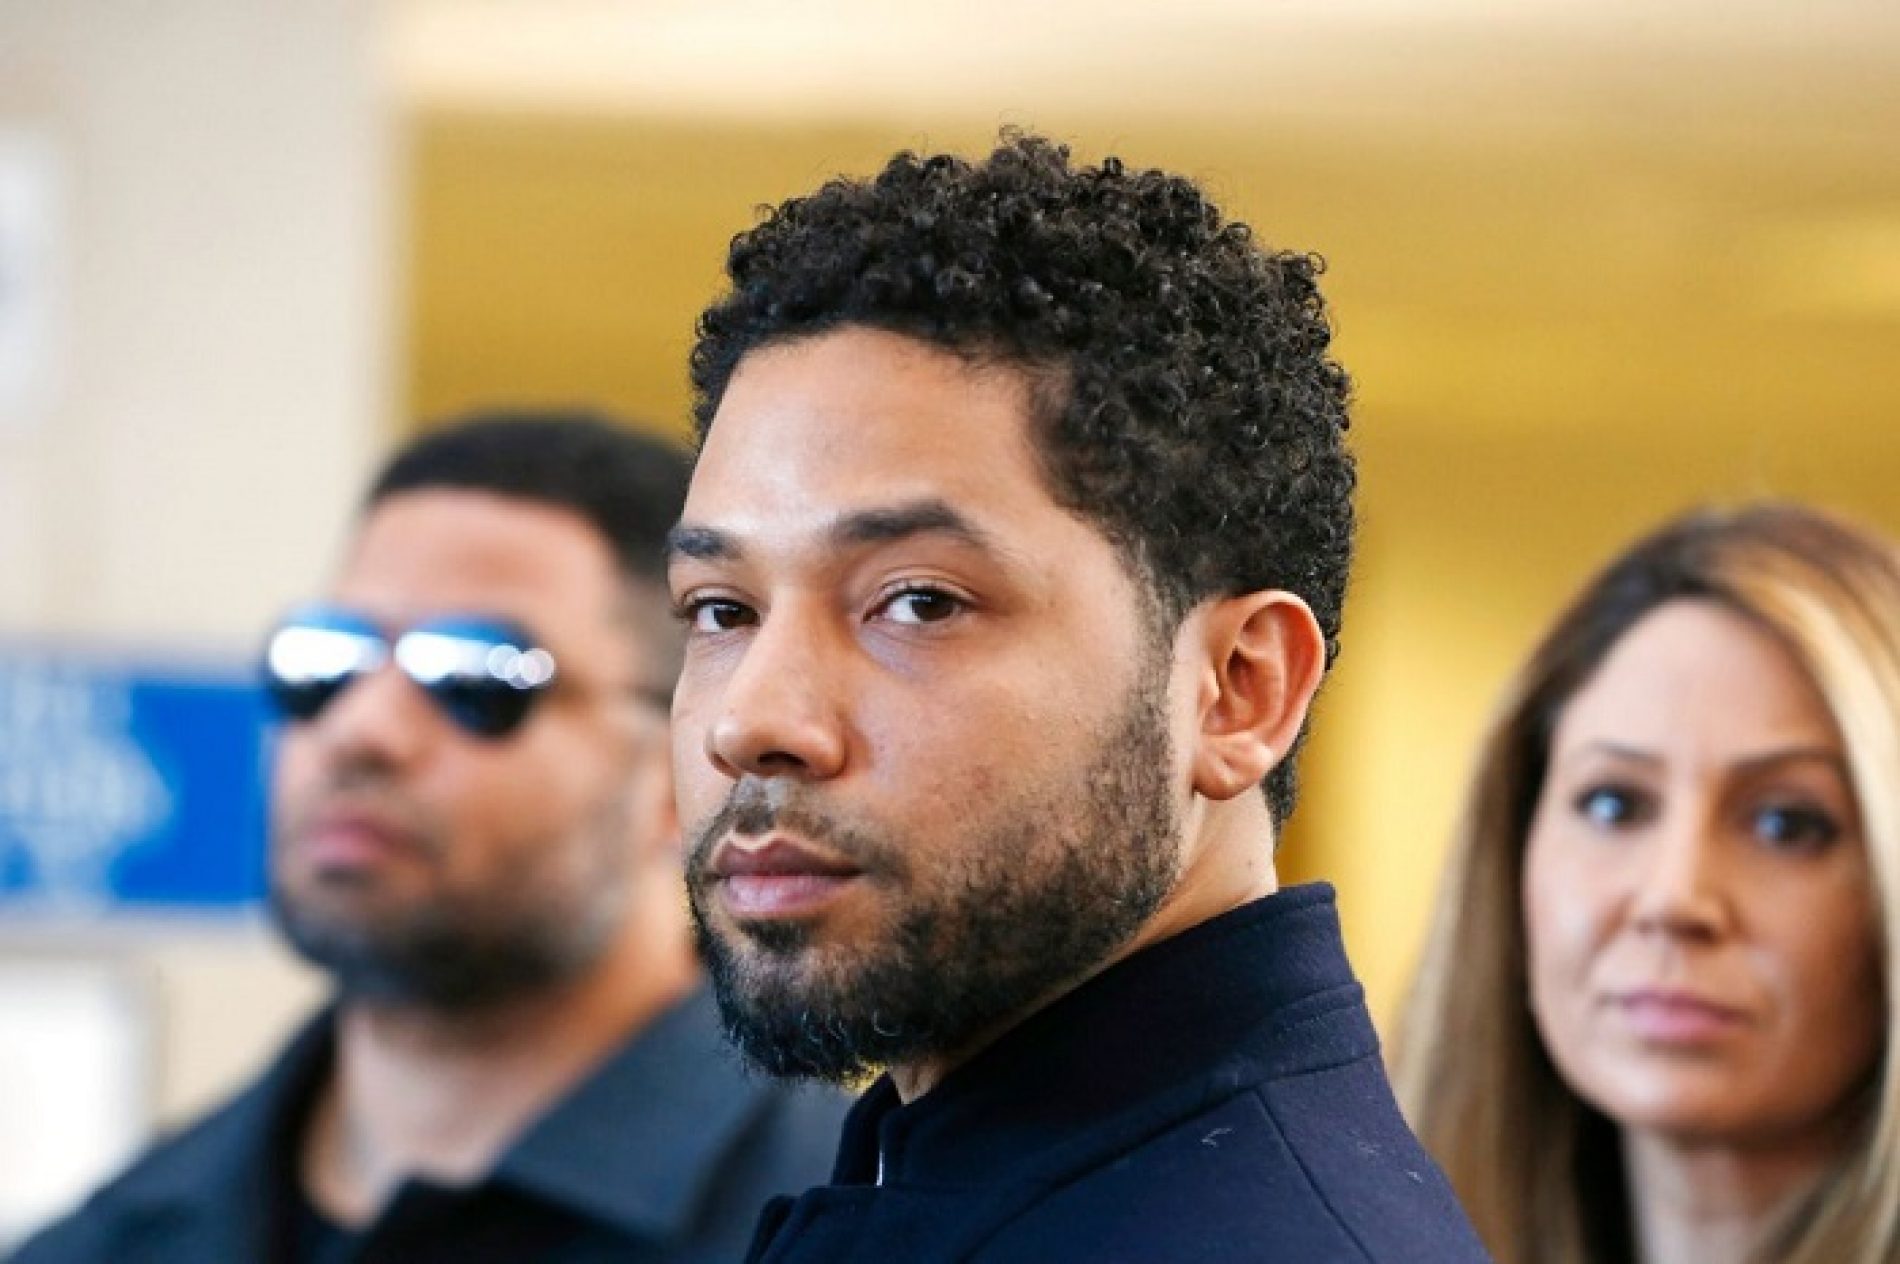 “I Haven’t Lied About A Thing.” Former ‘Empire’ Star Jussie Smollett Maintains His Truth